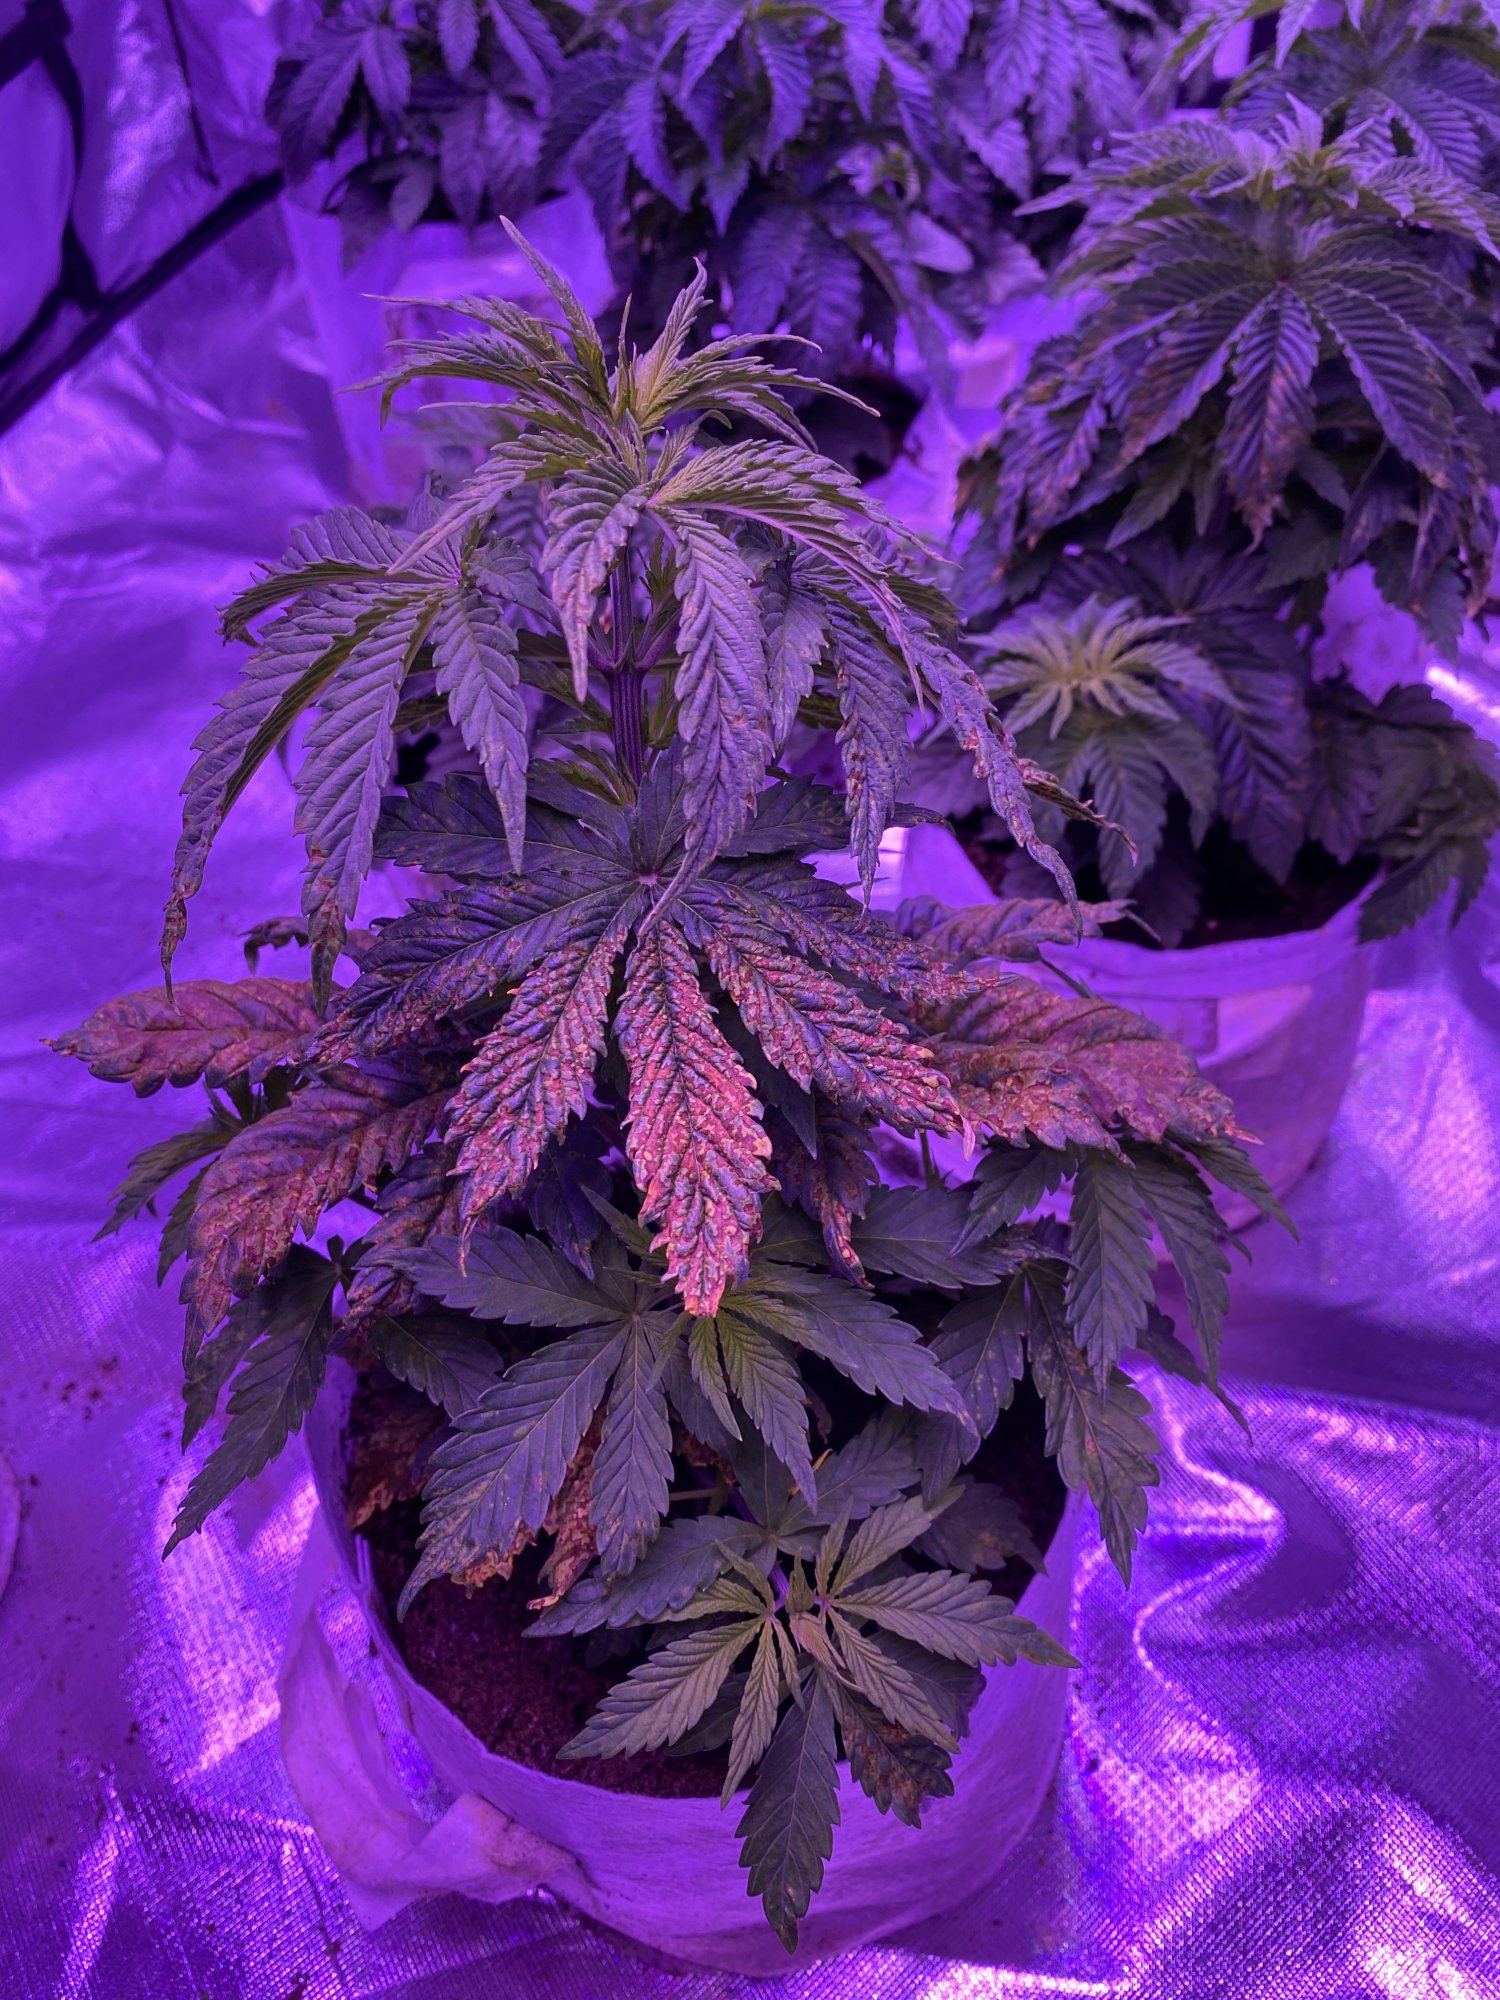 Help diagnose whats wrong with my girl